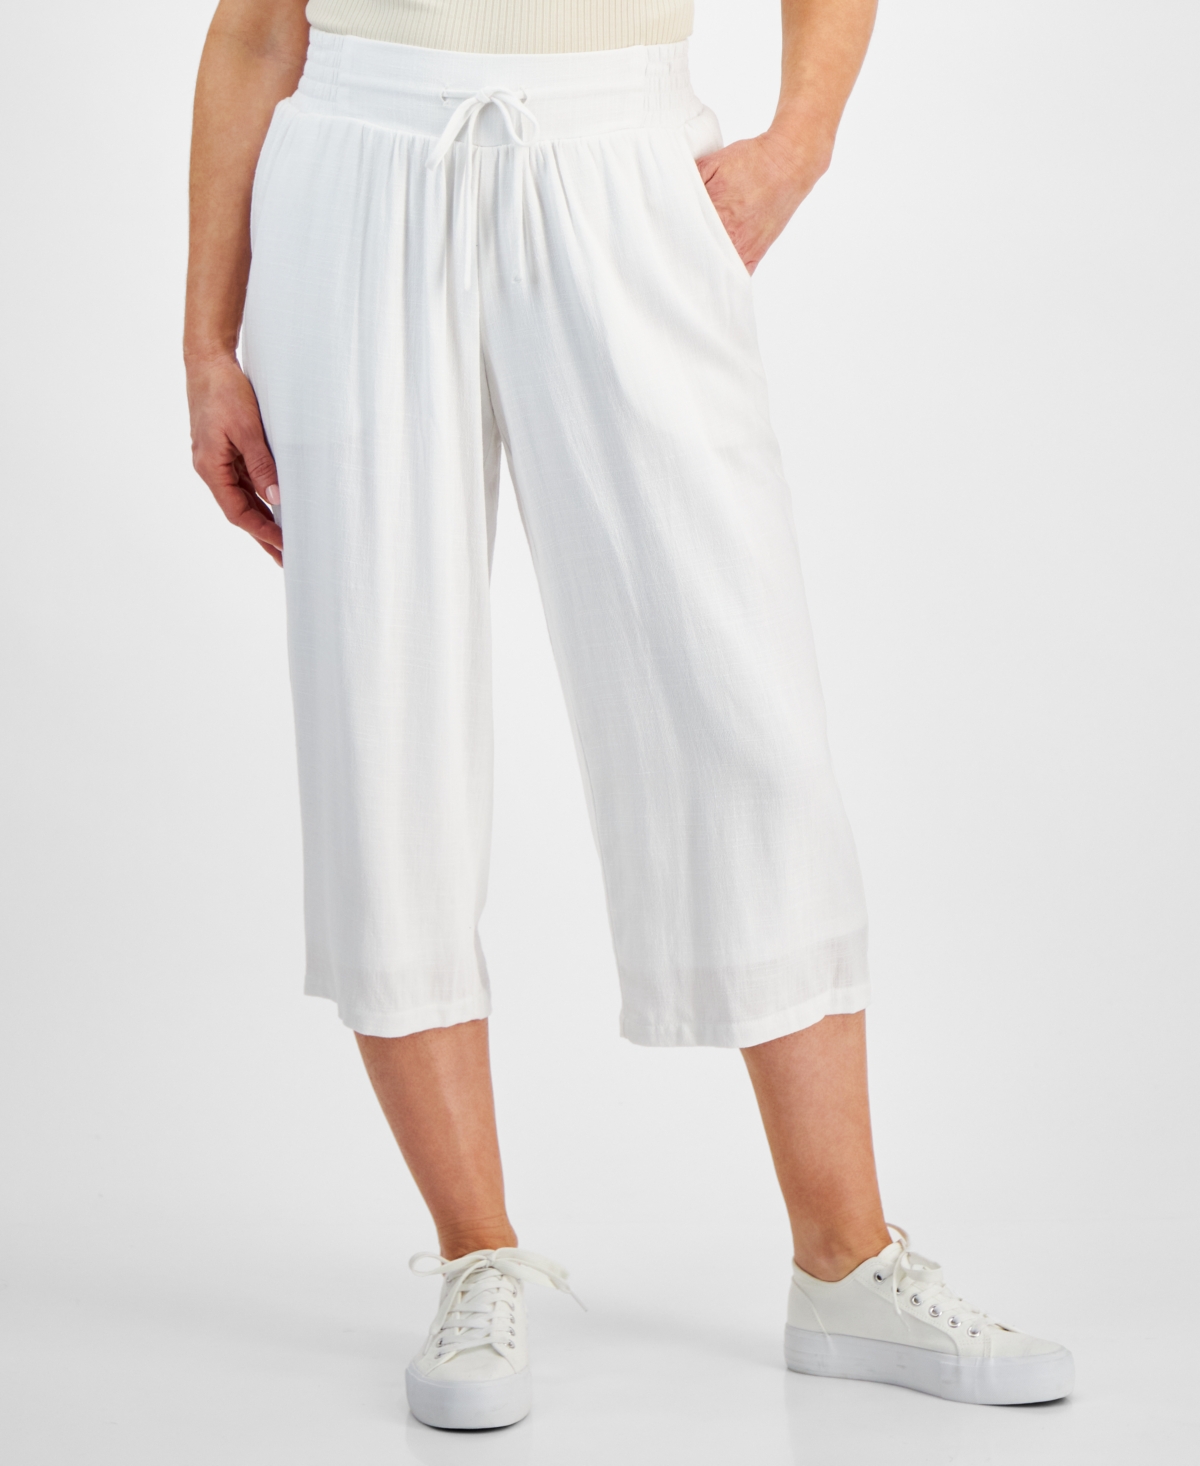 Petite Cropped Wide-Leg Pants, Created for Macy's - Bright White